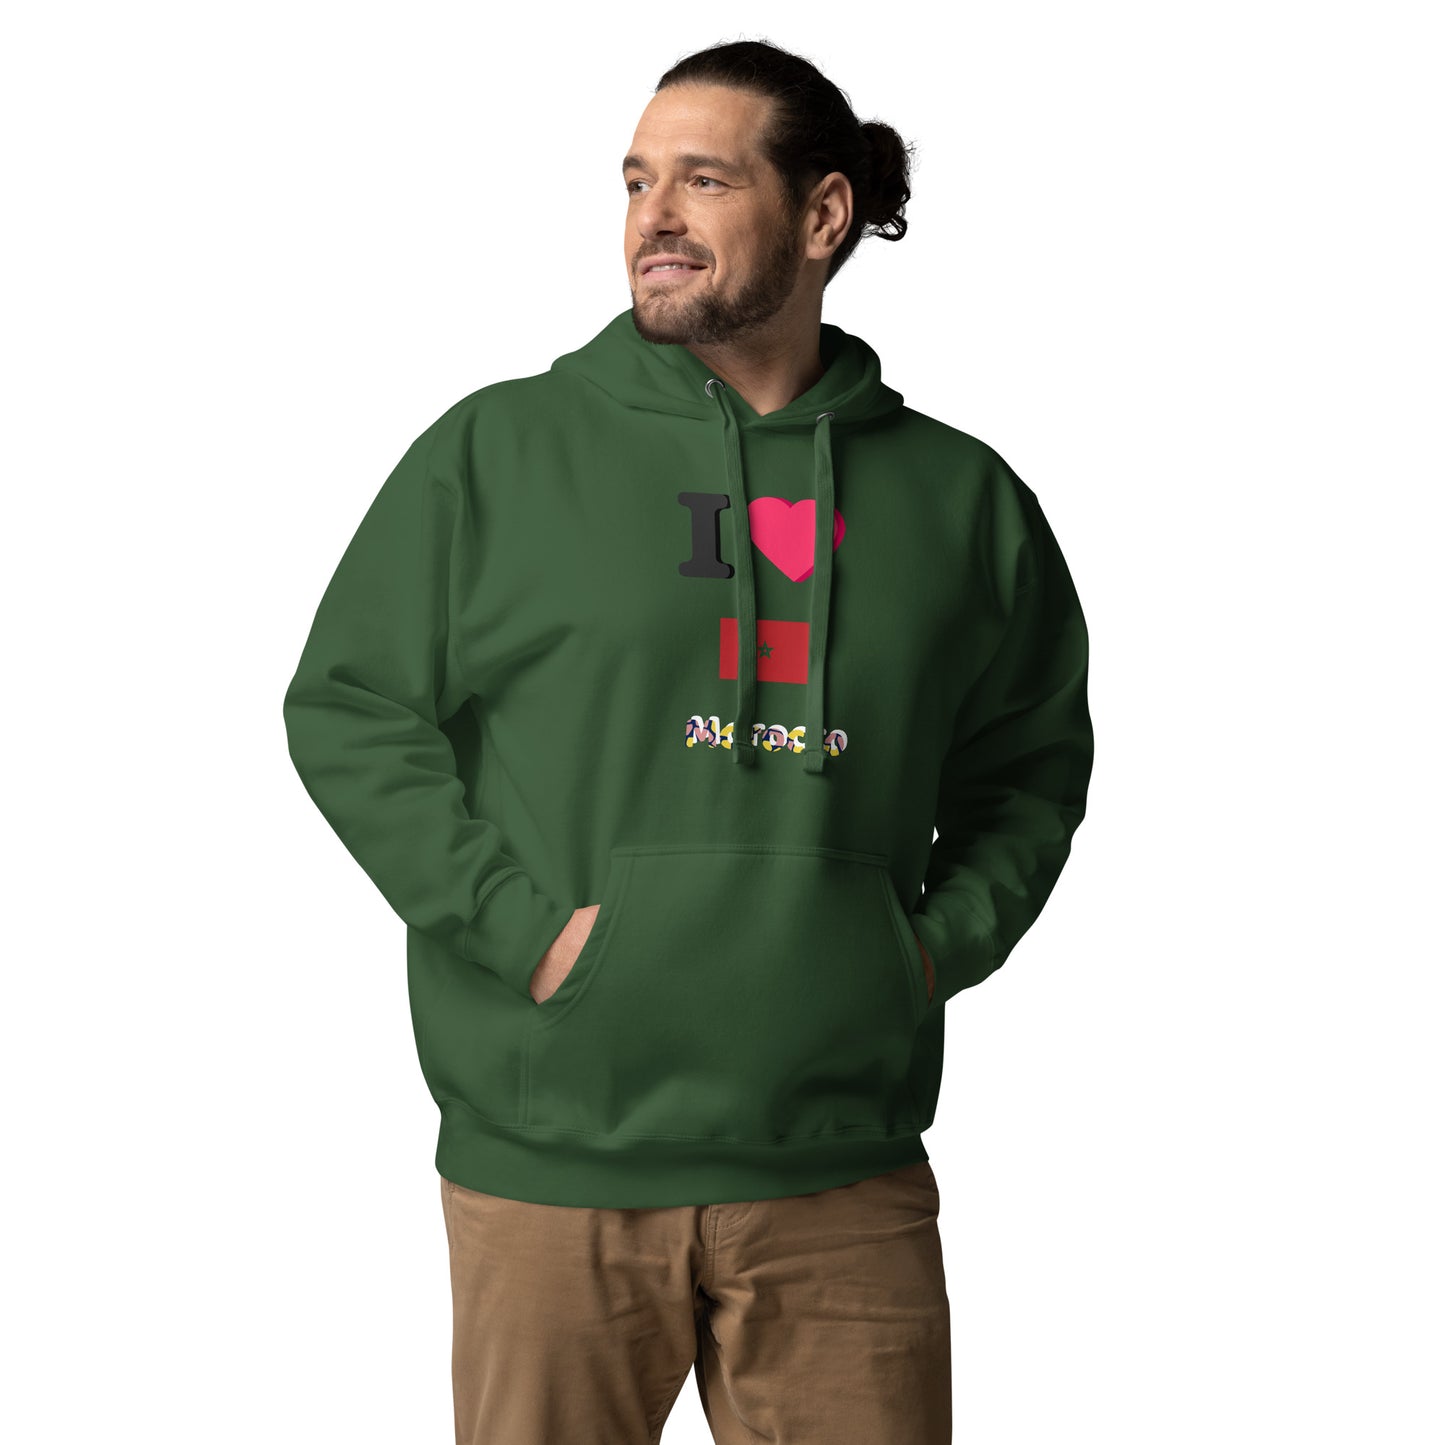 Moroccan Dreams: Unisex Hoodie with Moroccan Print